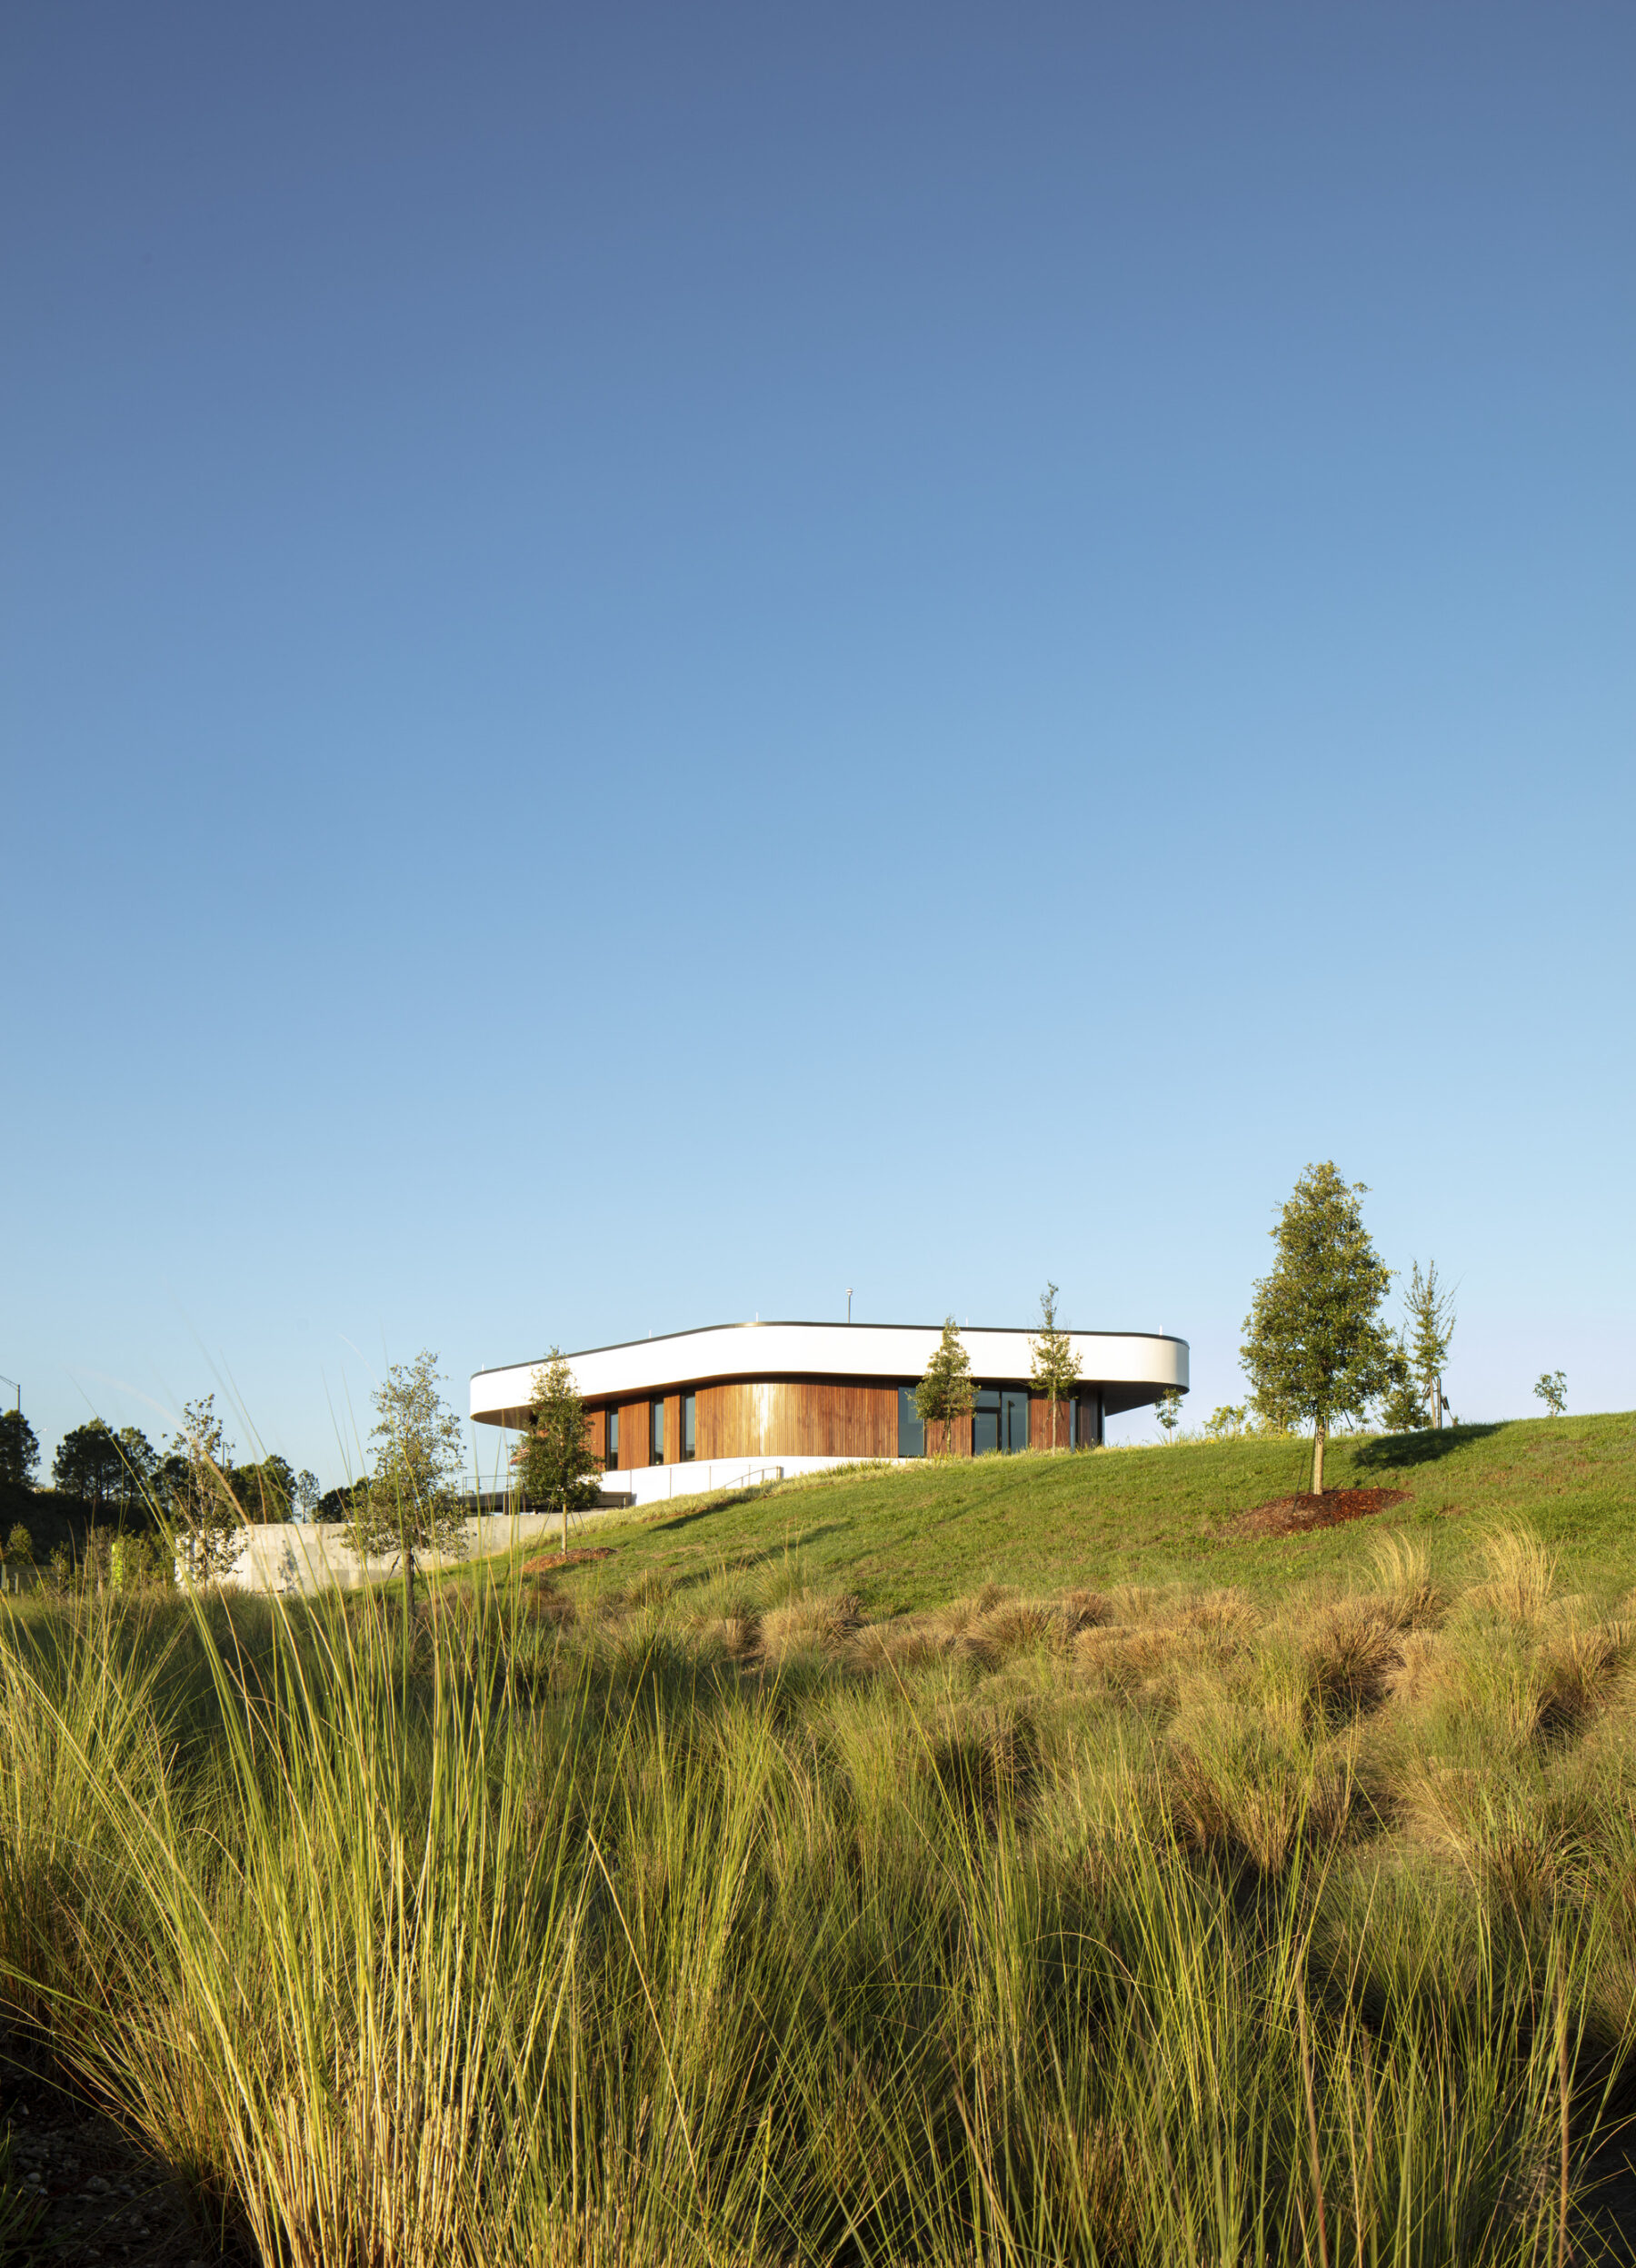 photograph of exterior of welcome center perched on top of hill with grass in foreground